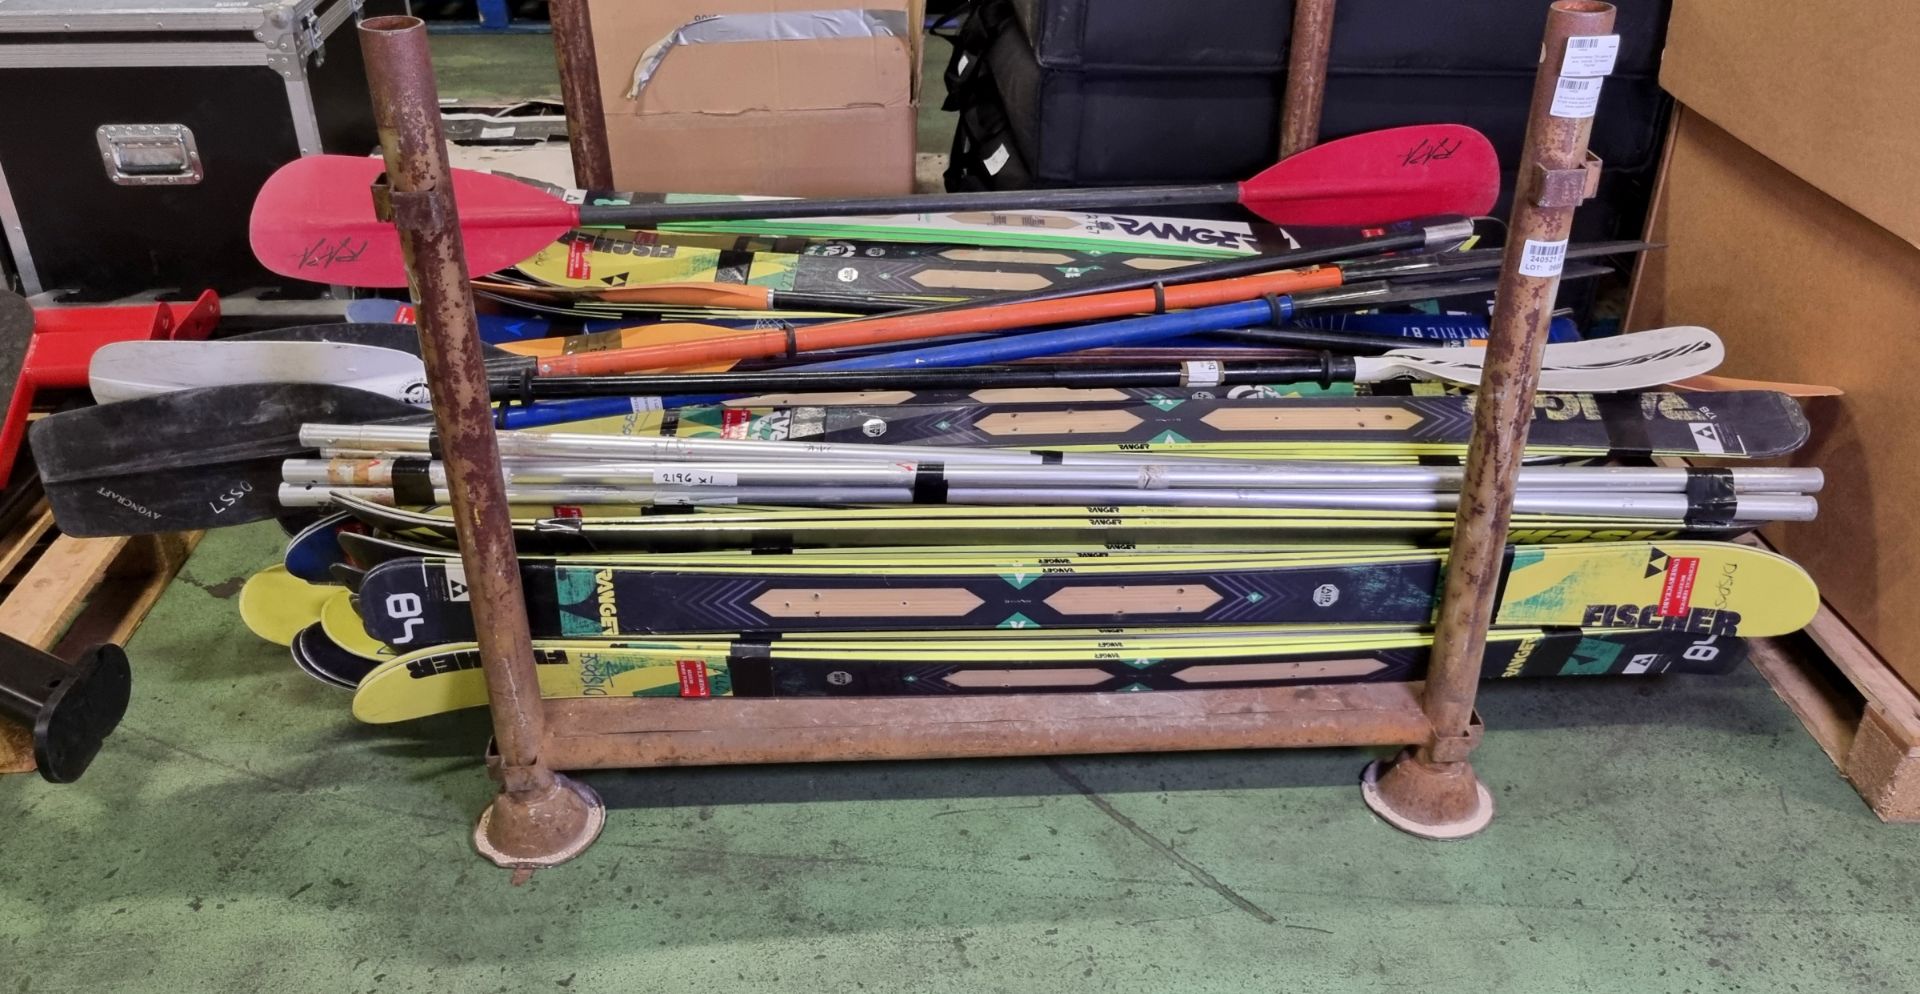 Approximately 75x pairs of skis - brands: Dynastar, Fischer